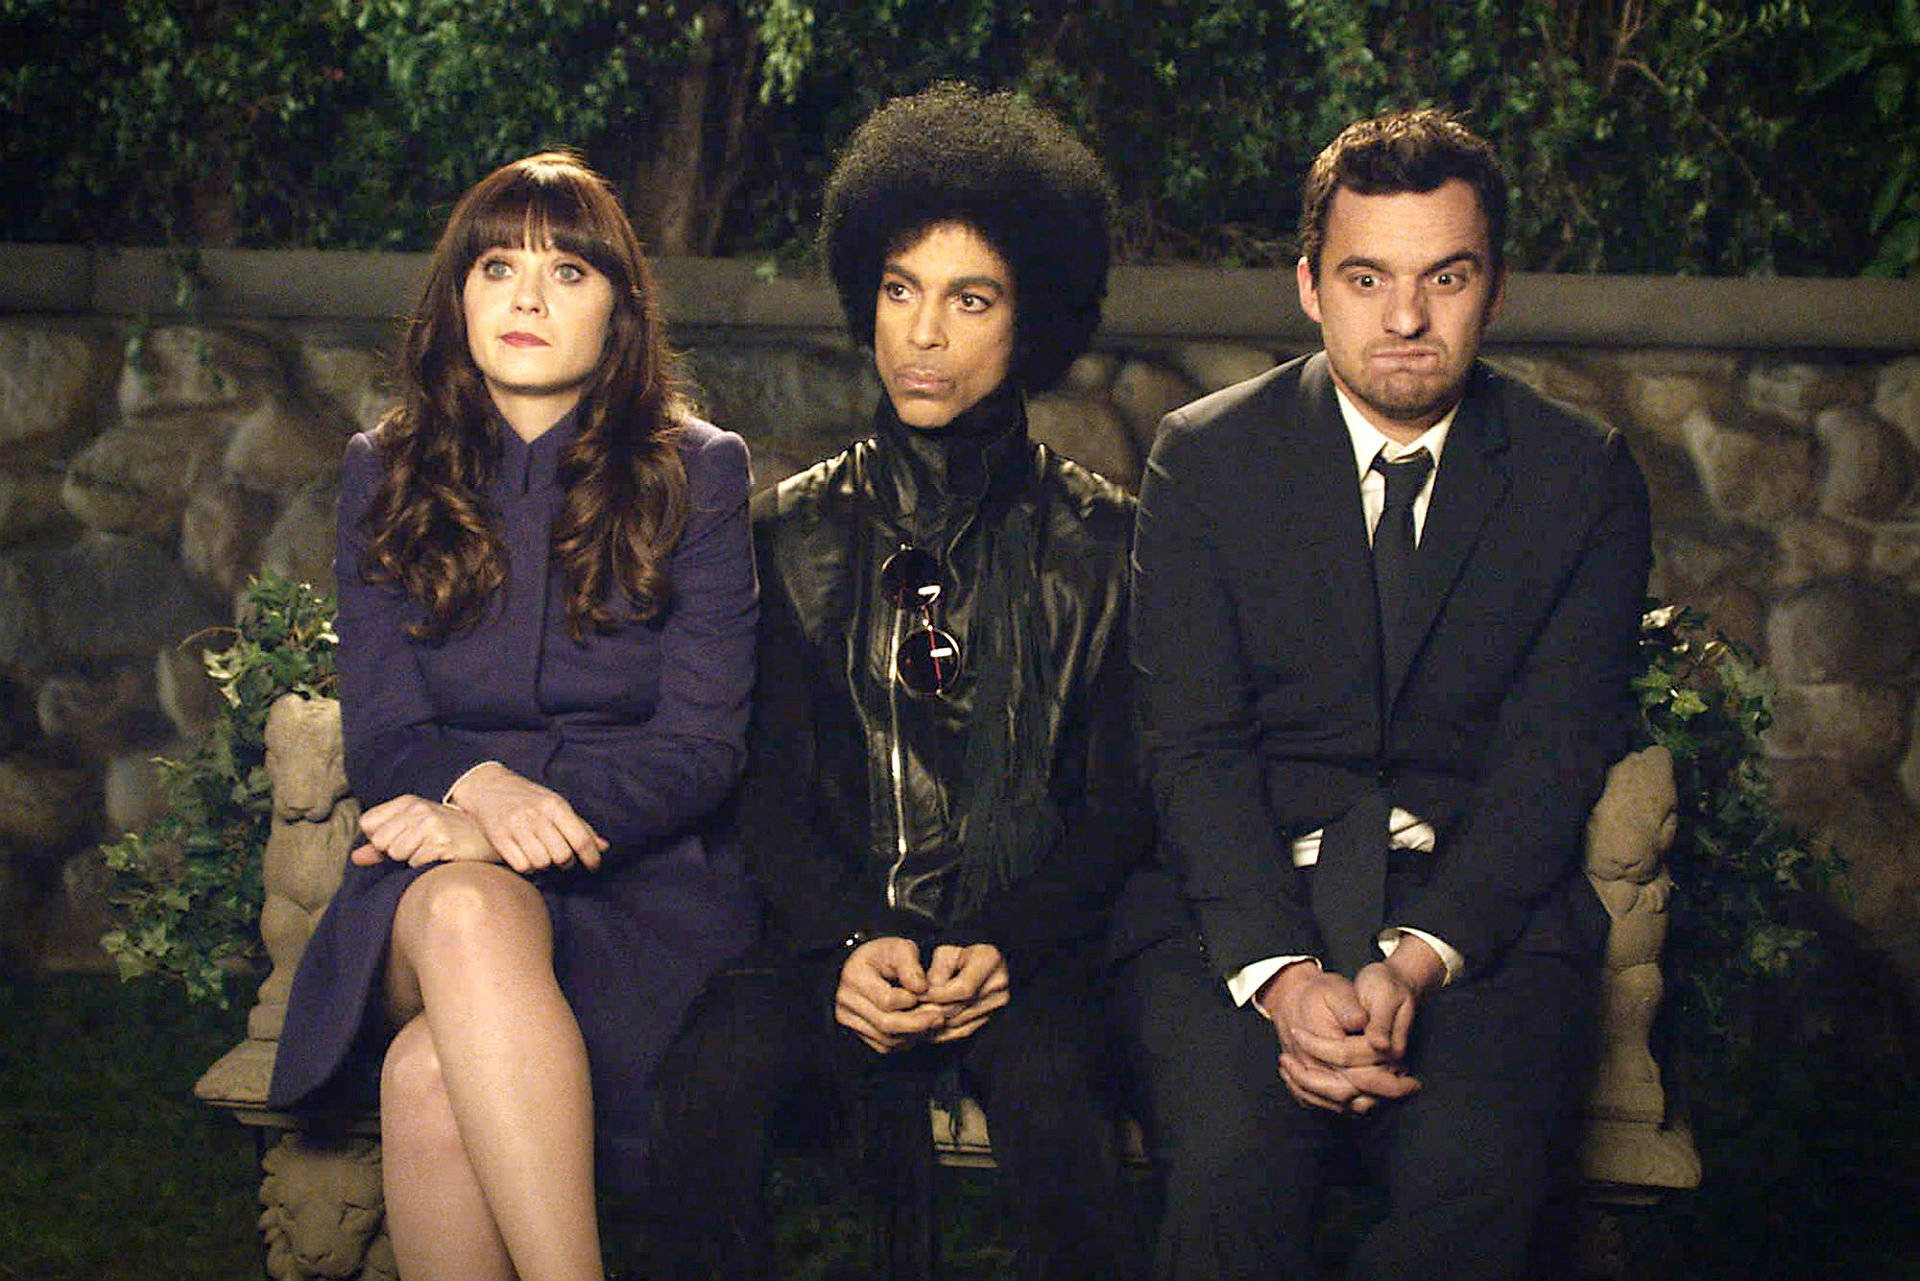 Sitcom New Girl With American Singer-songwriter Prince Wallpaper